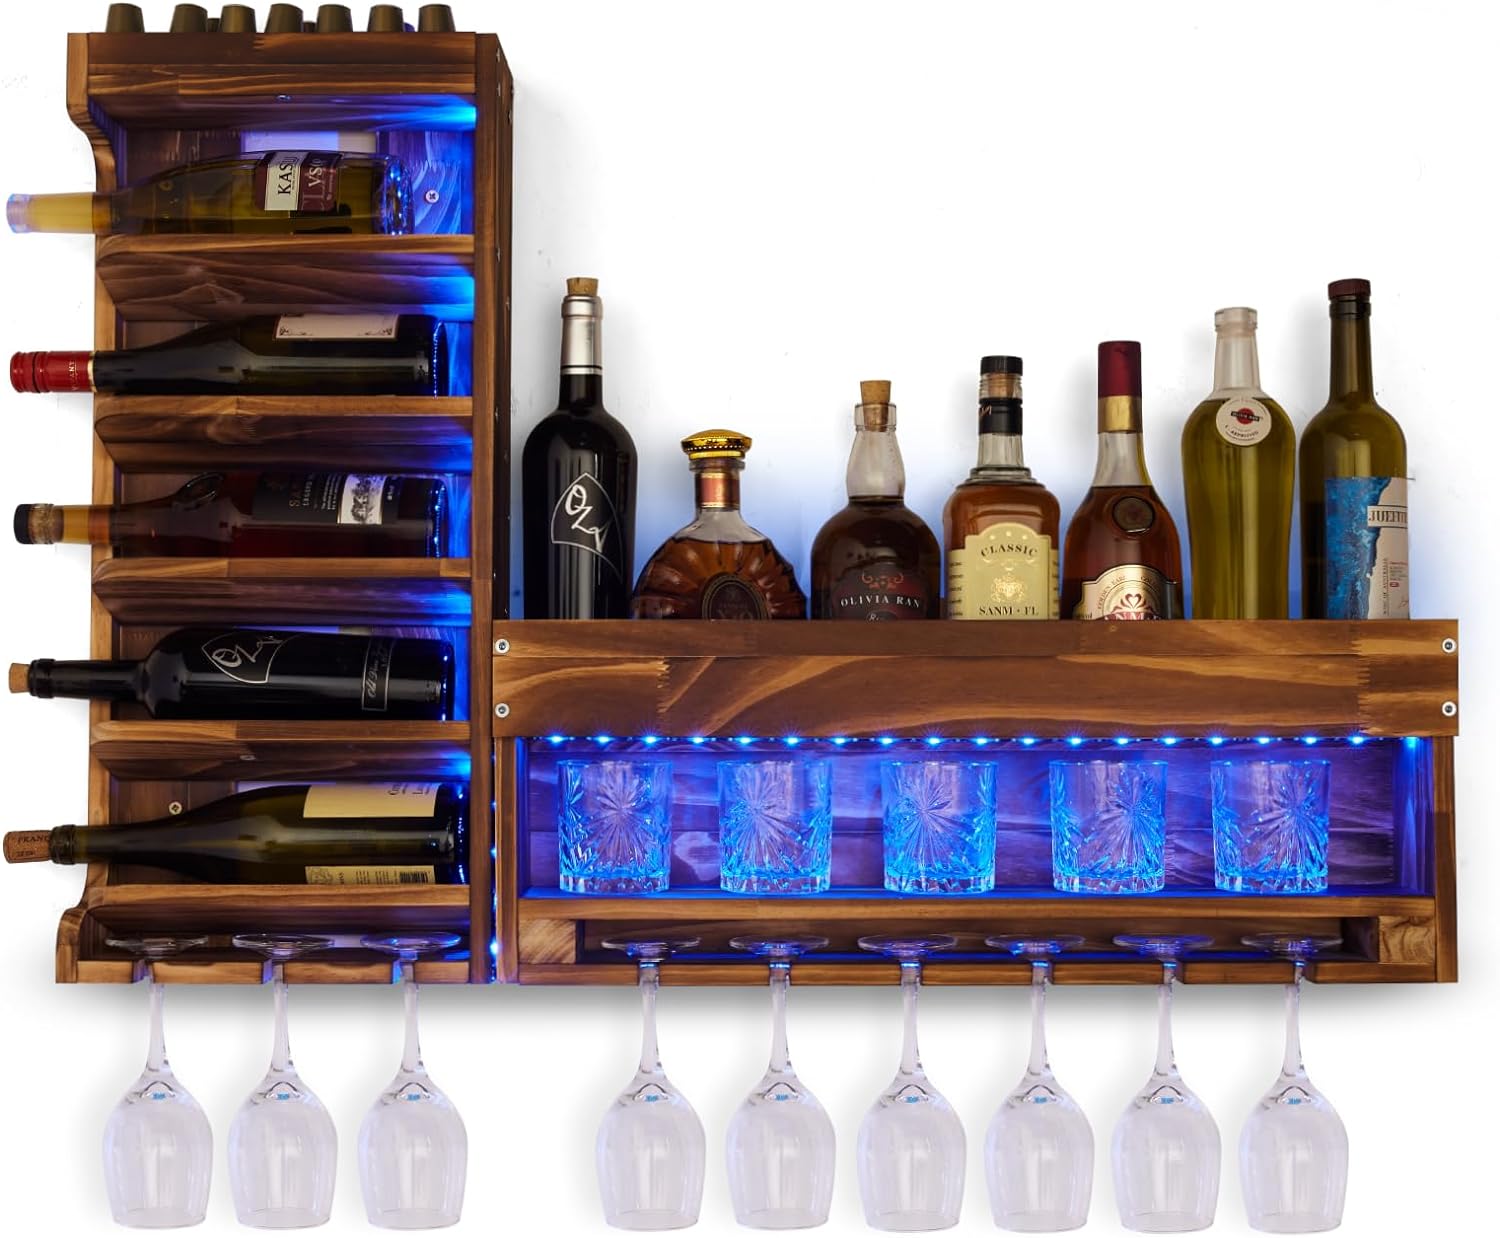 Homde Wine Rack with LED Light Wall Mounted Wood,Wine Shelf with Bottle Stemware Glass Holder Rustic, Wine Display Storage Rack with Cork Holder for Home Bar Kitchen Decor